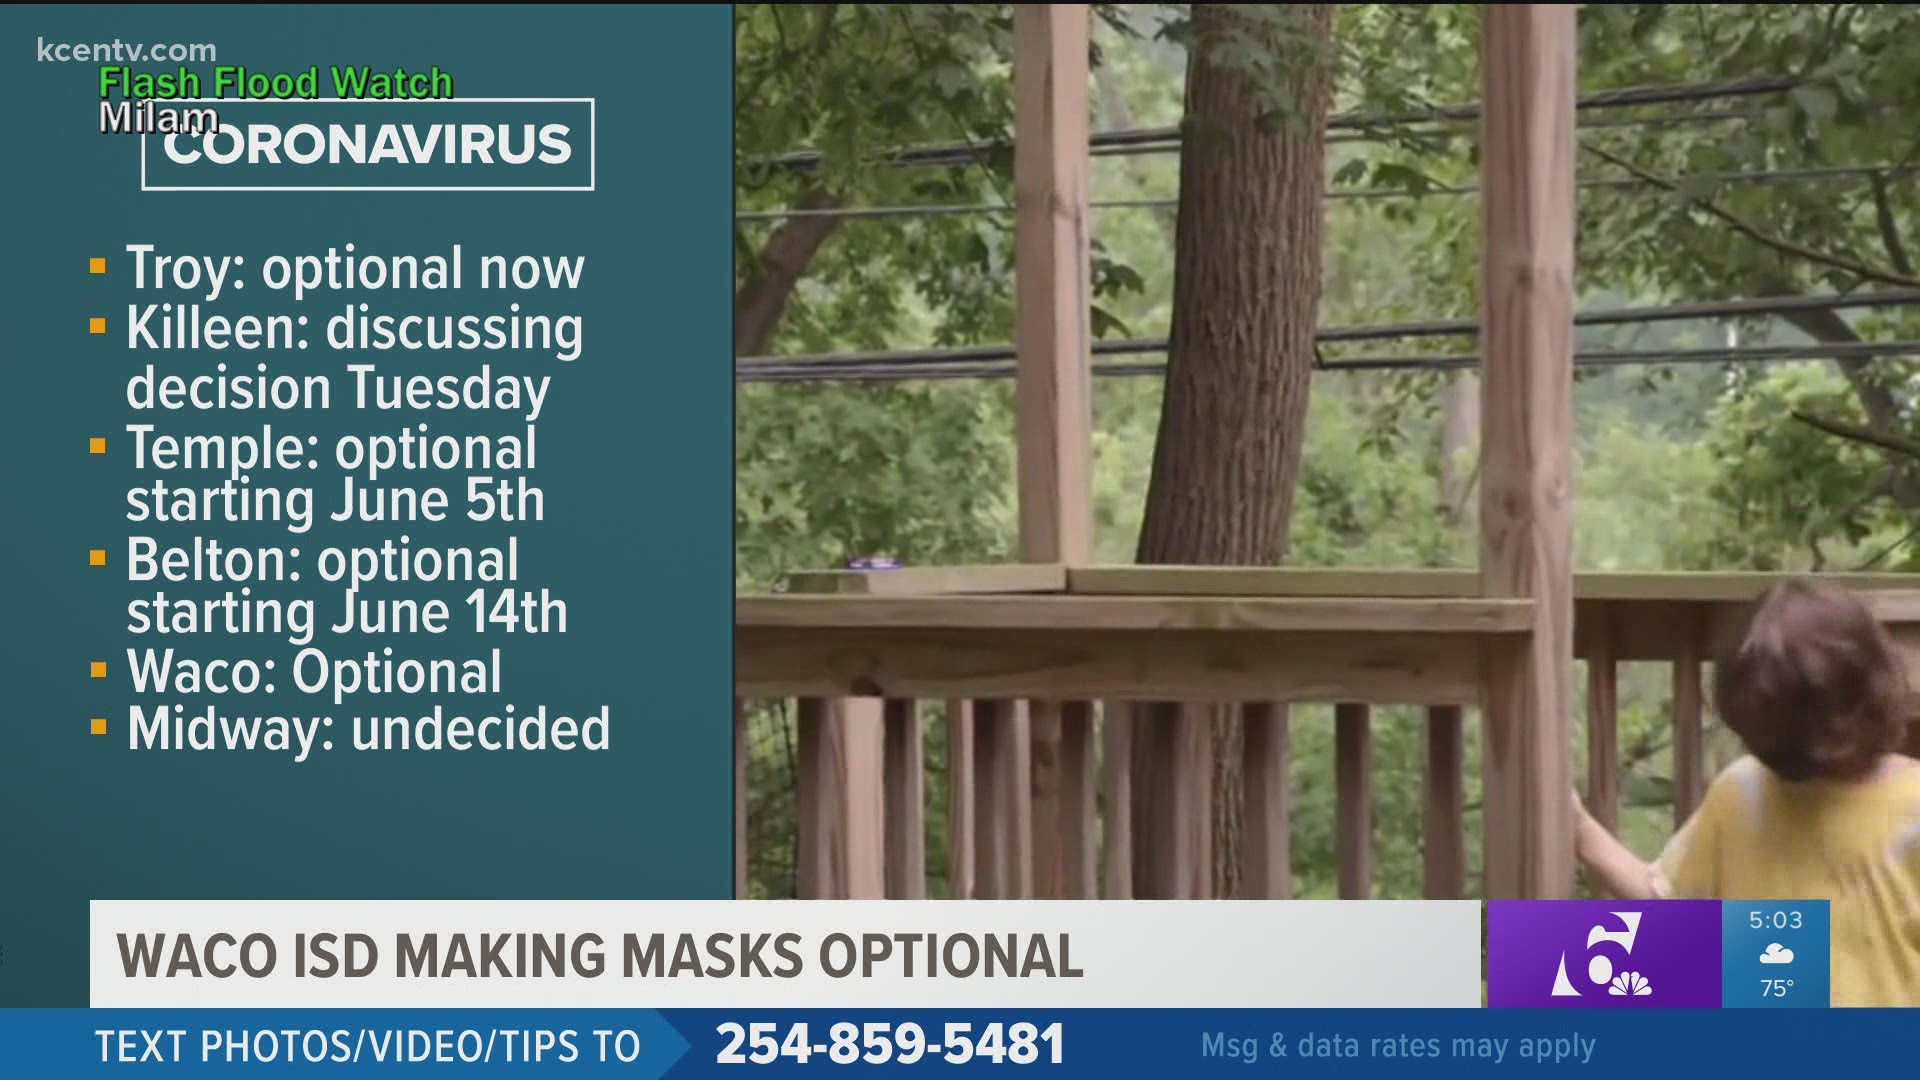 Though face masks will be optional, Waco's superintendent still encourages wearing them saying "the virus is still here."